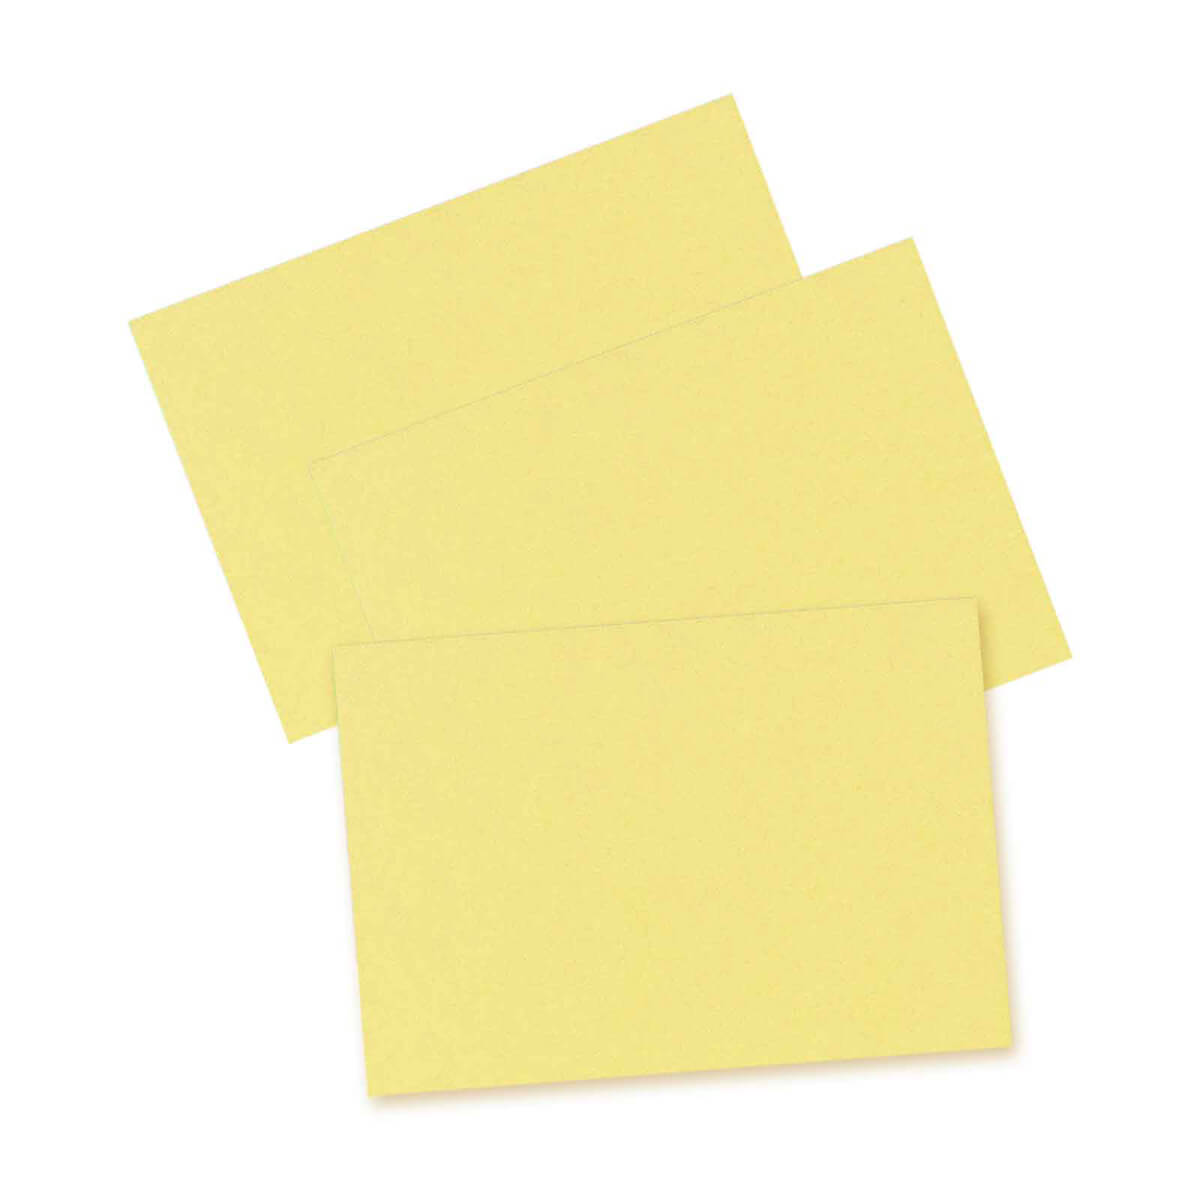 Herlitz Index cards blank 100 pieces shrink wrapped a6 Yellow